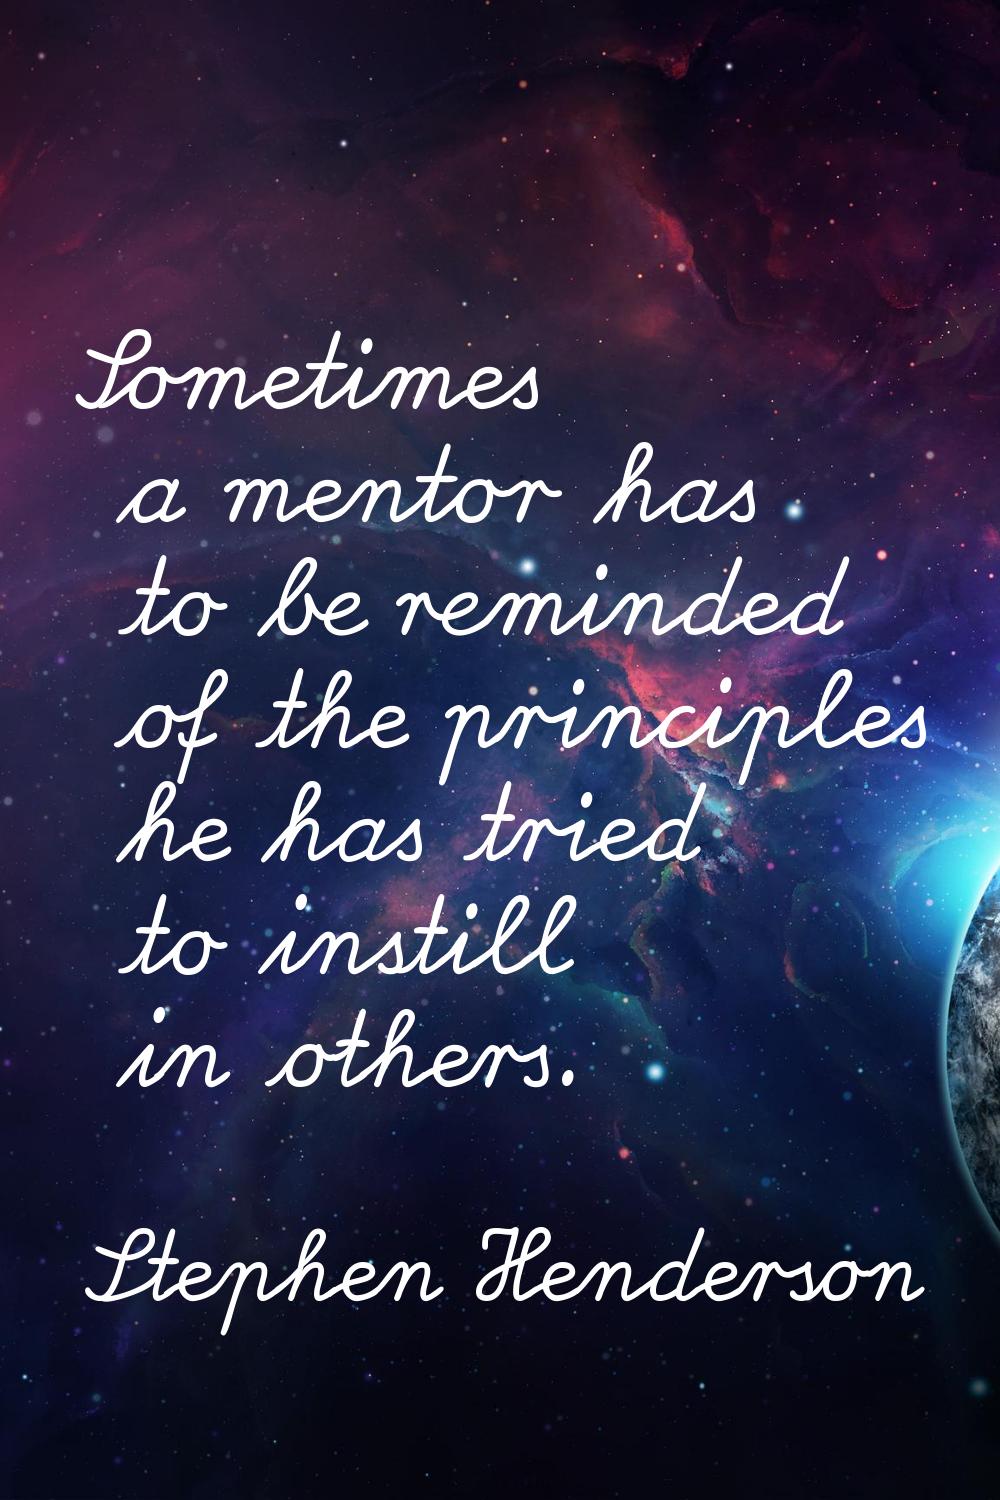 Sometimes a mentor has to be reminded of the principles he has tried to instill in others.